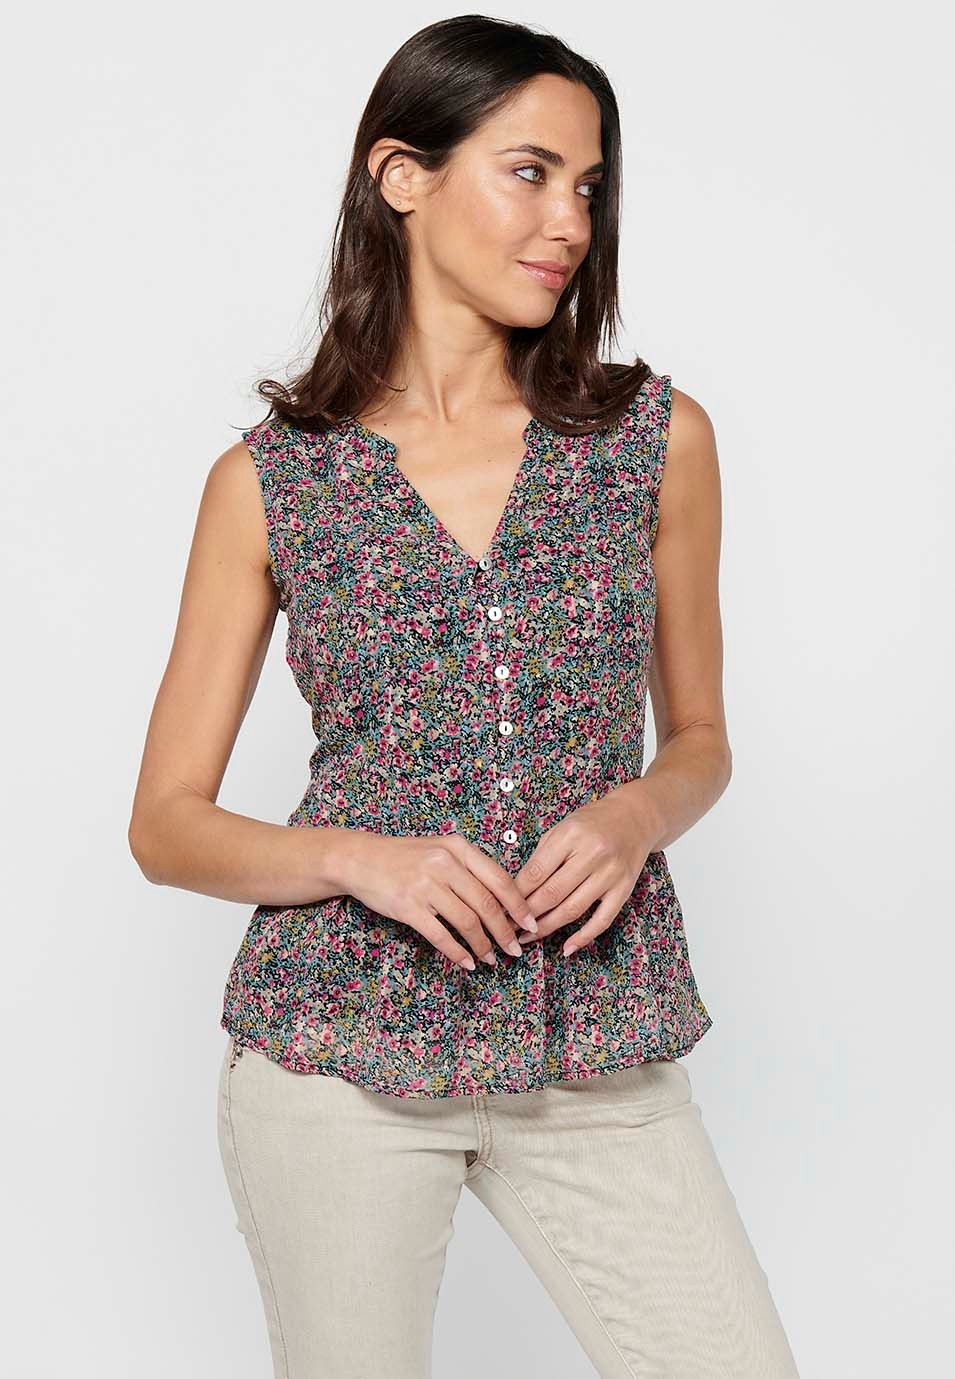 Sleeveless blouse with V-neck and floral print with ruffle finish and front button details in Multicolor for Women